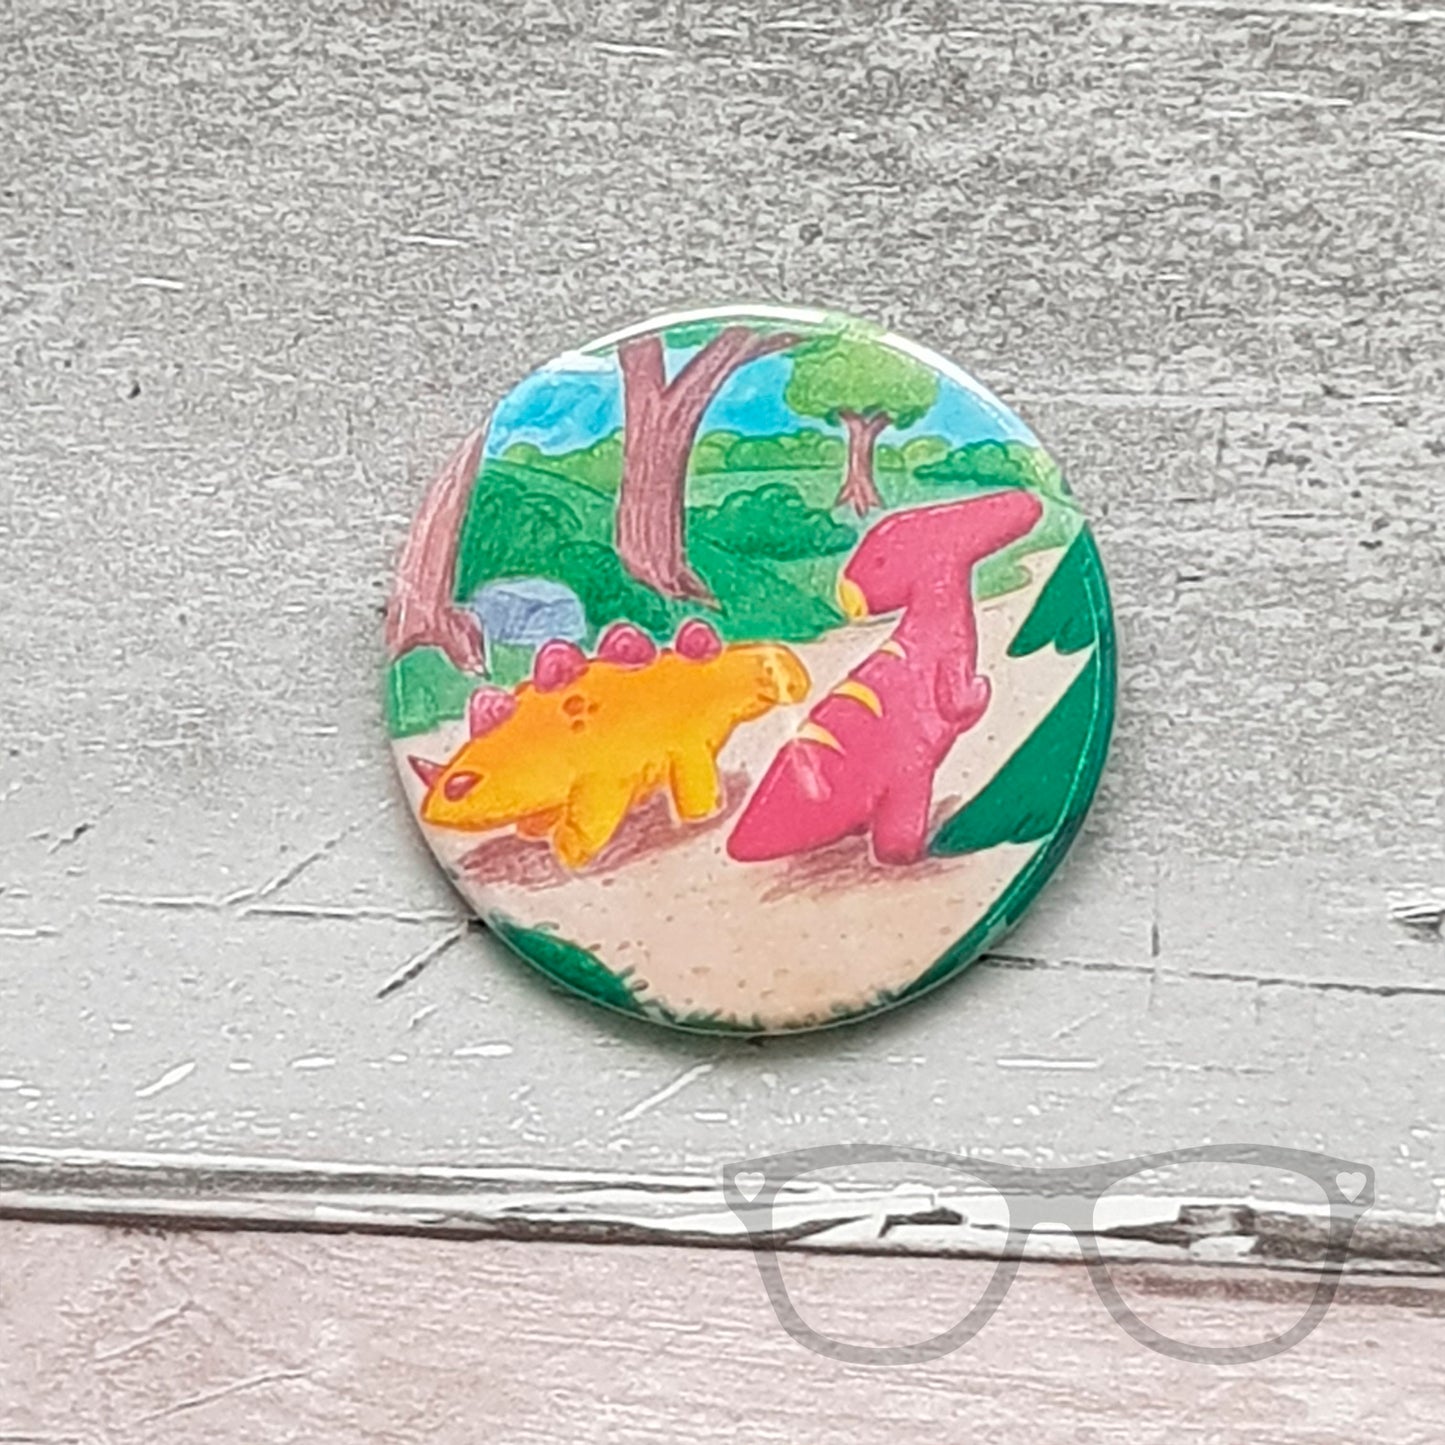 This 58mm badge shows the illustration of Derek and Irene the dinosaurs starting off on their adventure.